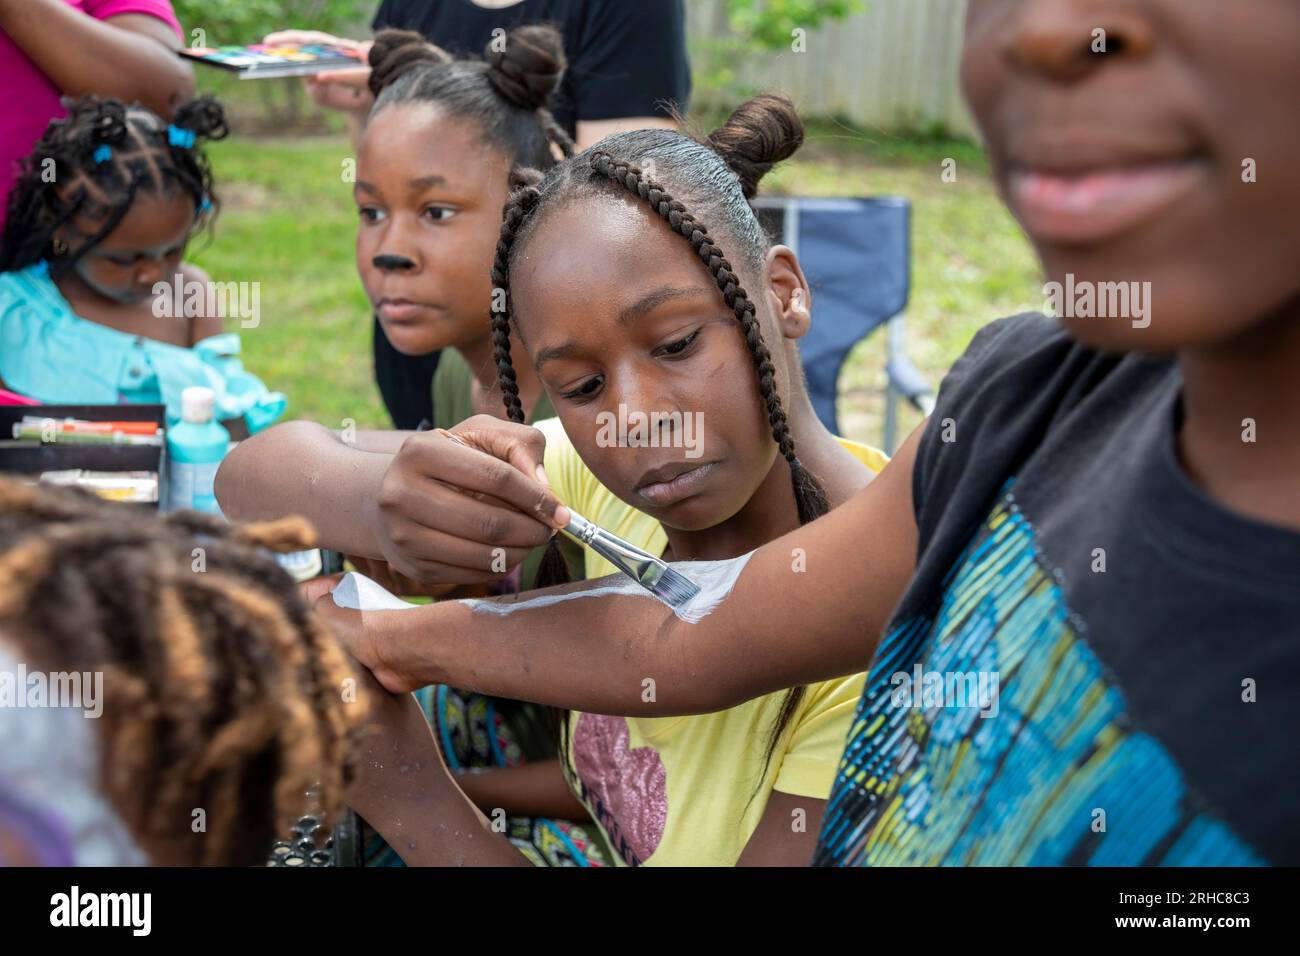 Detroit, Michigan - Children enjoy face and body painting as the the Morningside neighborhood holds a picnic/party called the 'Summer Sizzler.' It was Stock Photo